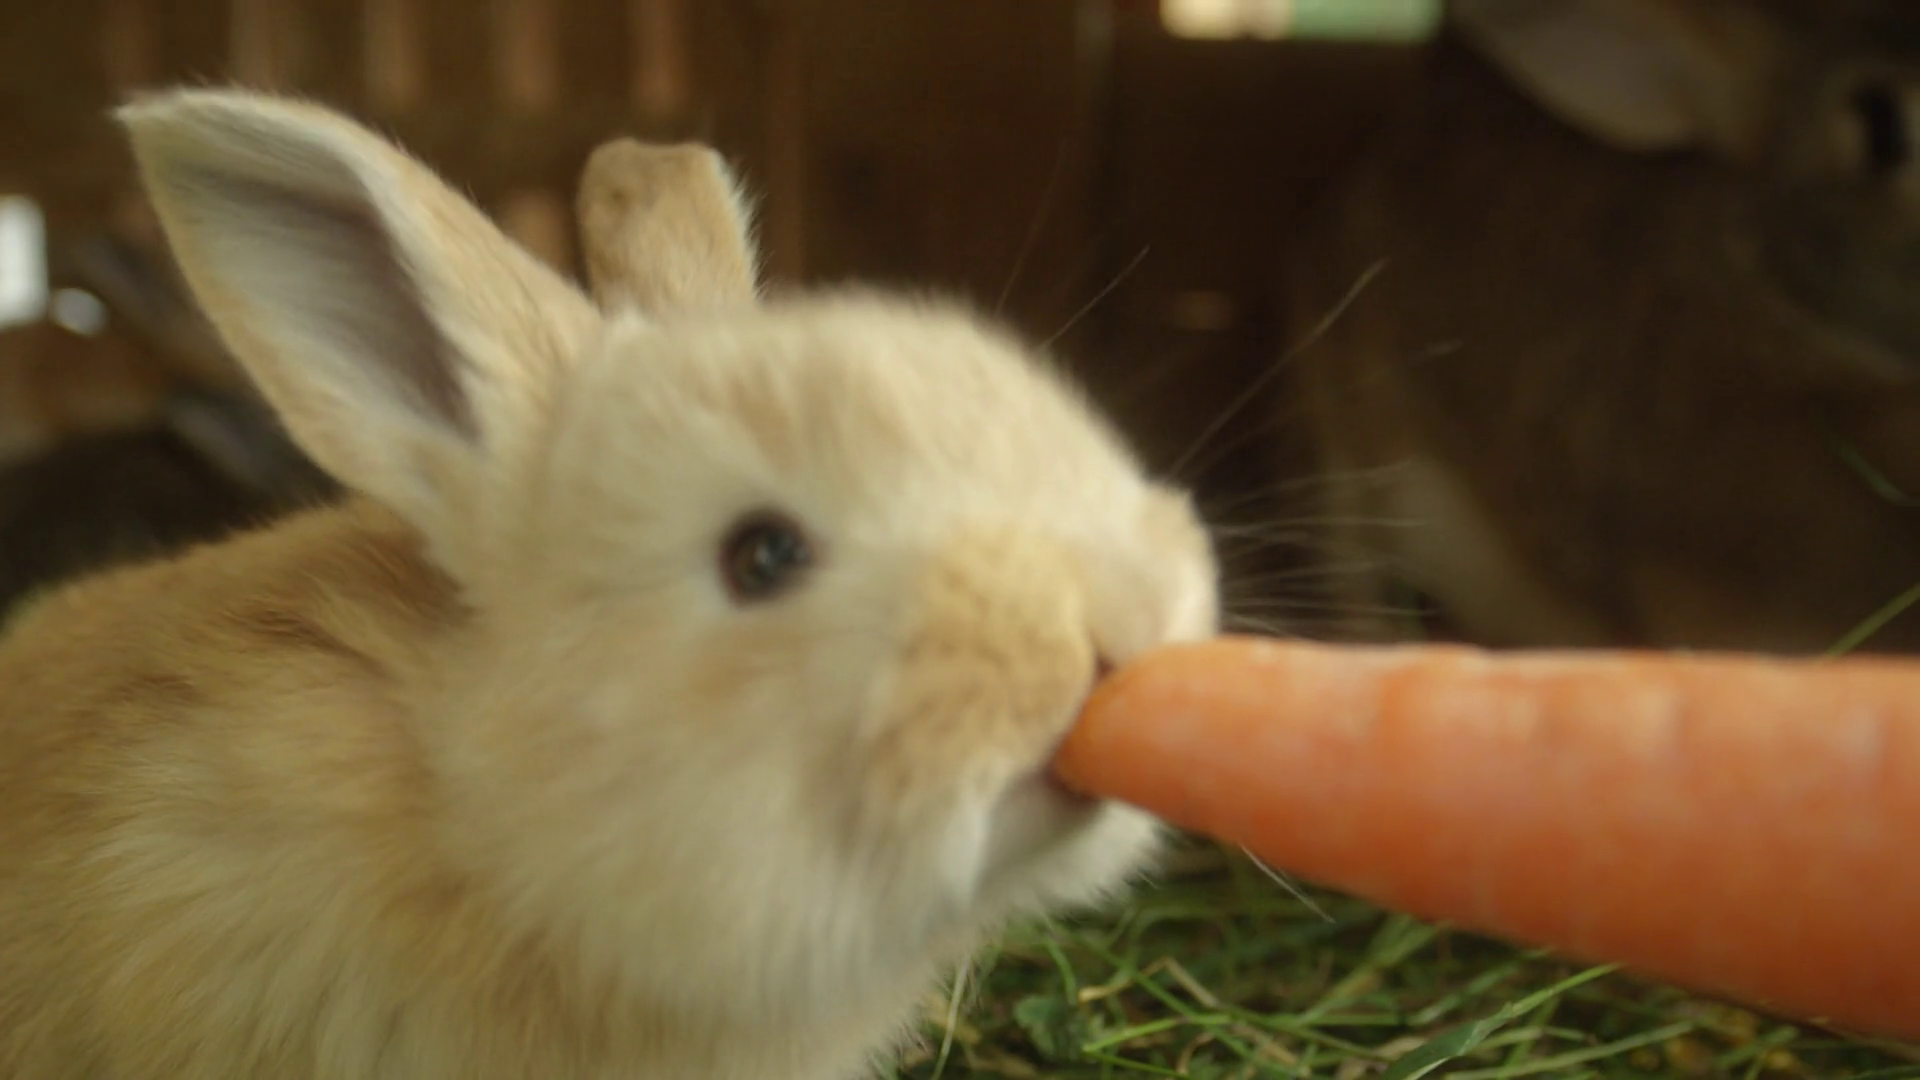 CLOSE UP: Adorable fluffy little light brown bunny eating big fresh ...